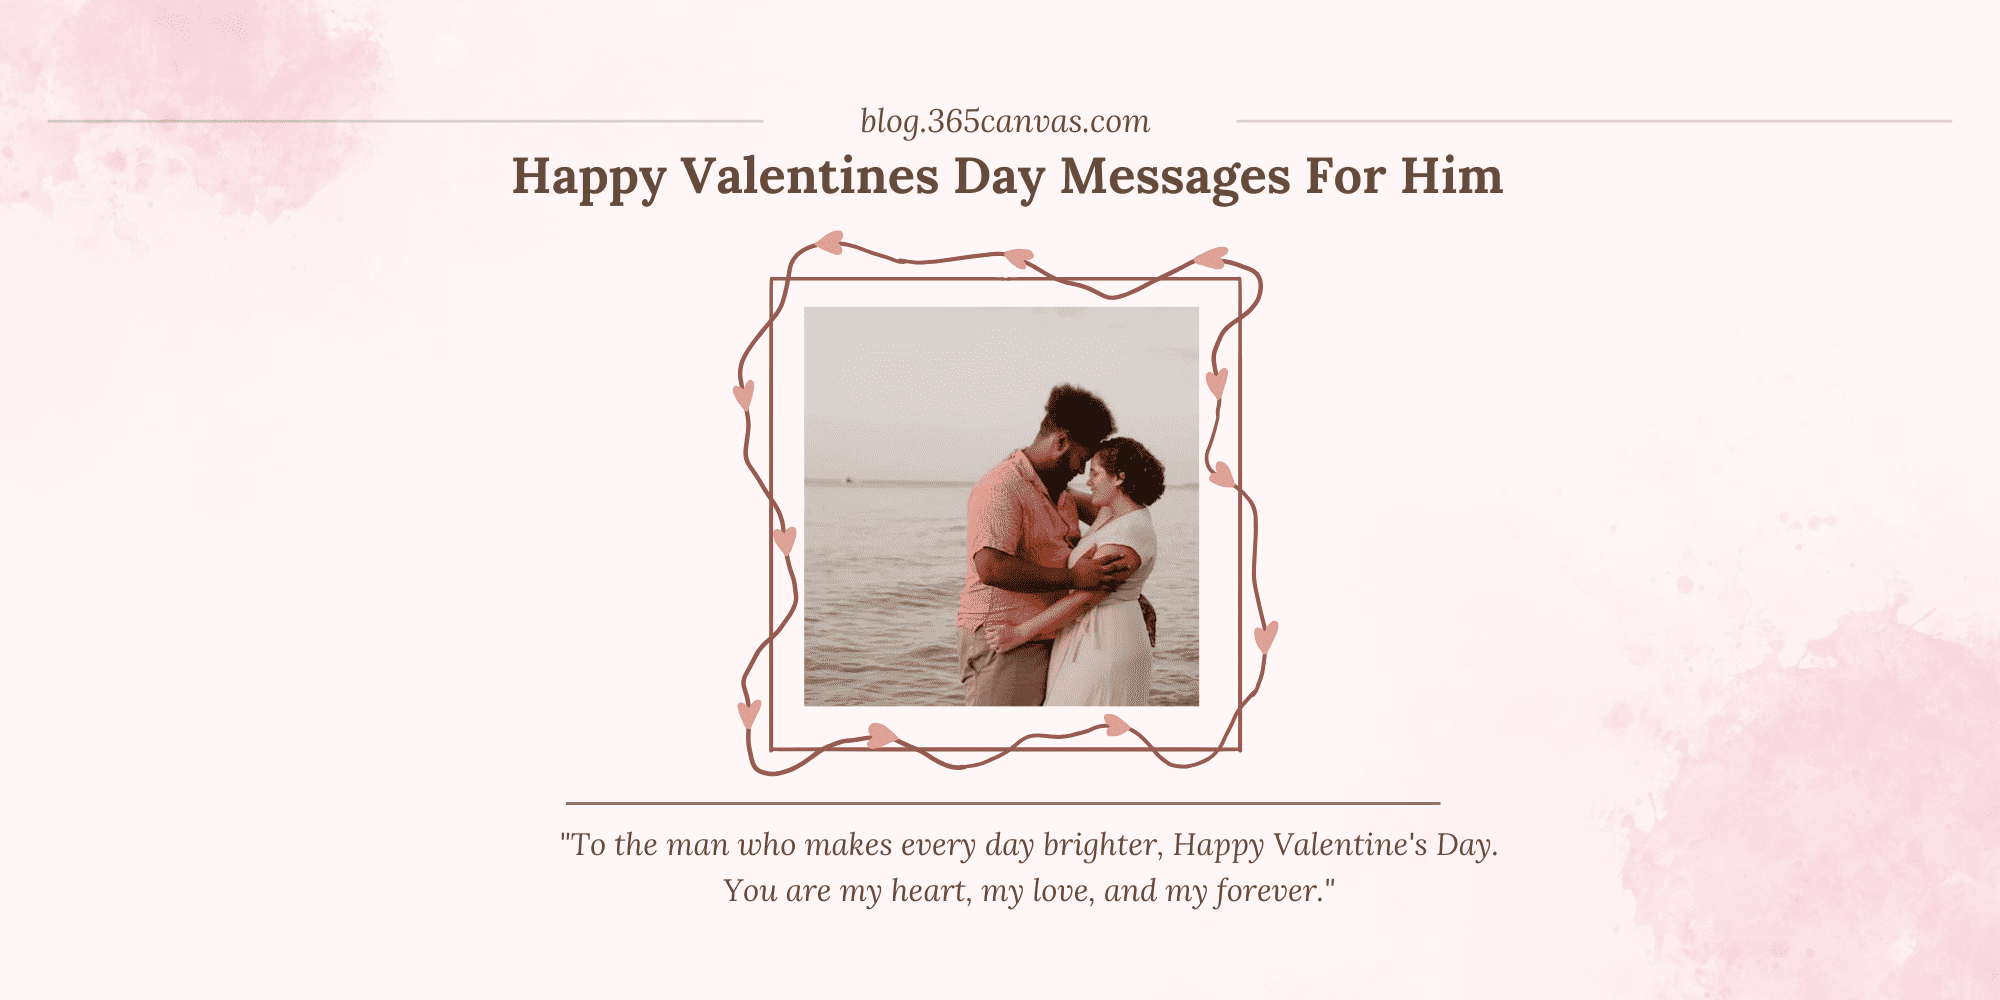 100+ Romantic Valentine’s Day Messages for Him